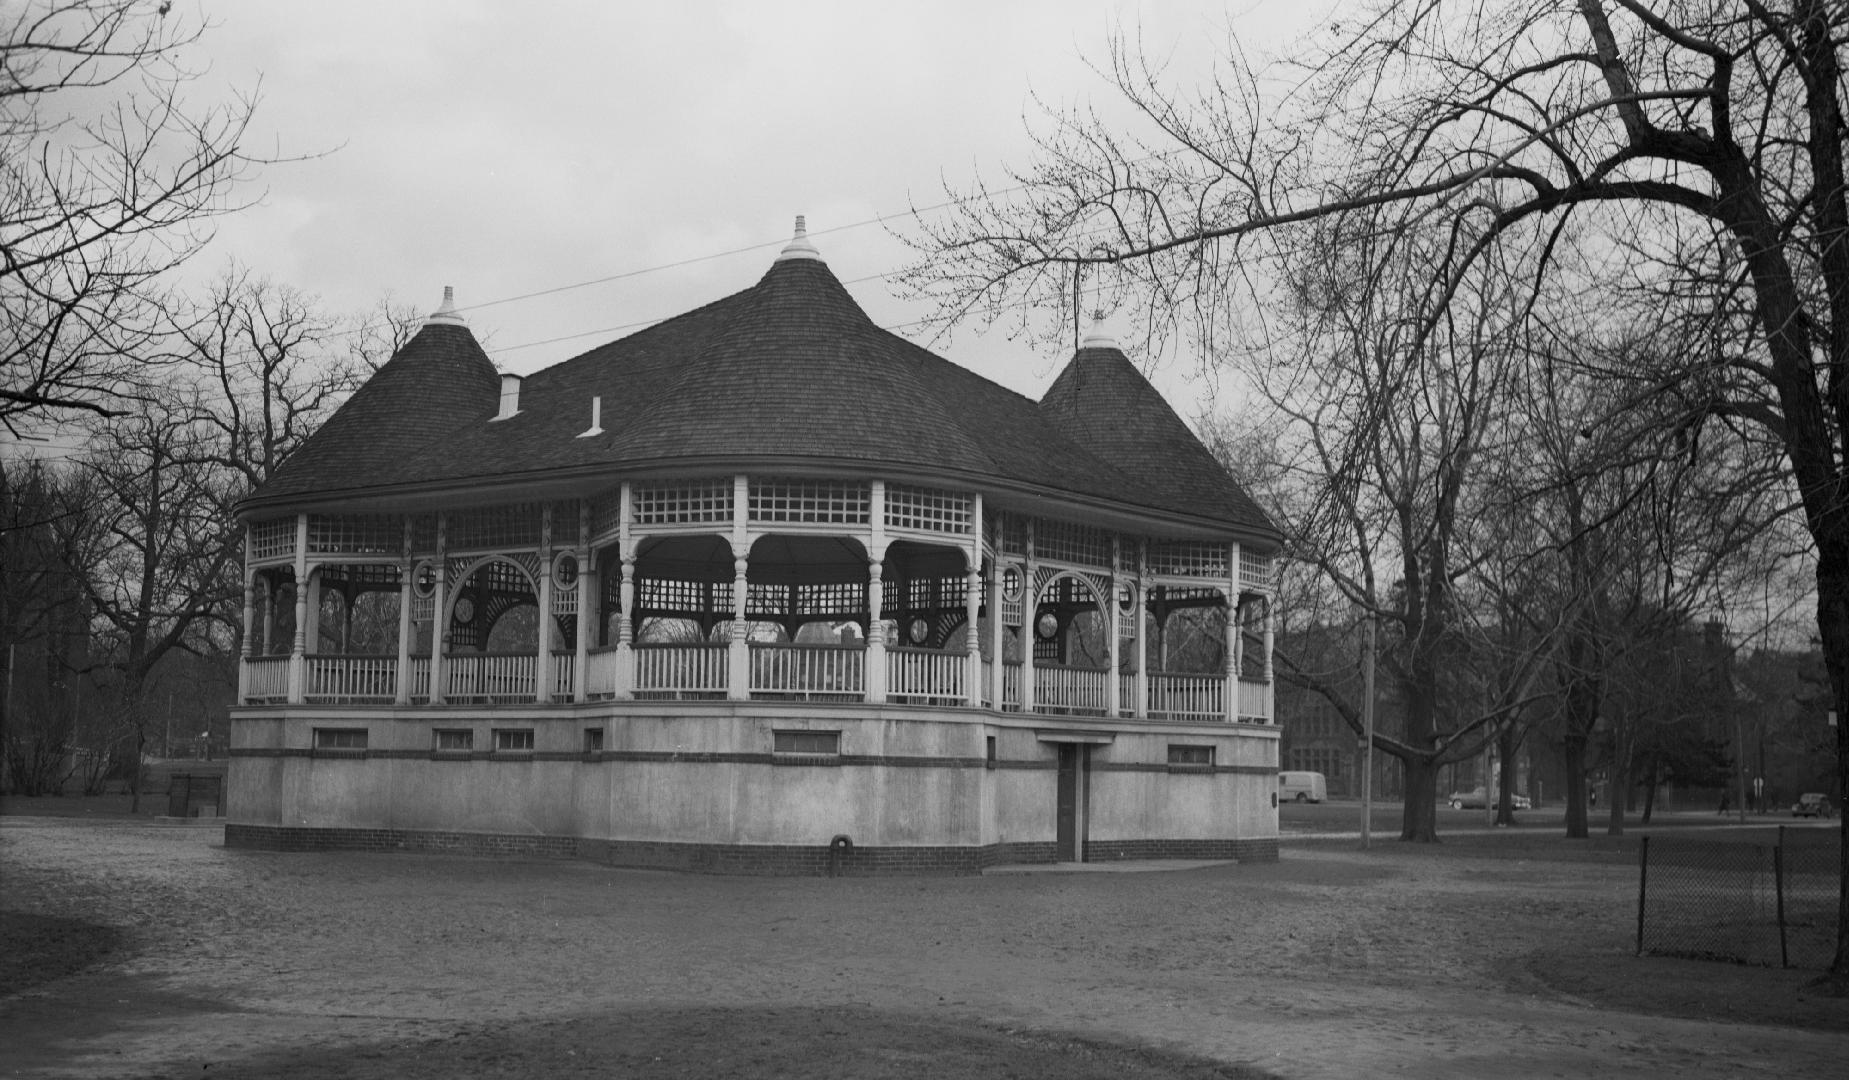 Queen's Park, bandstand, north of Parliament Buildings